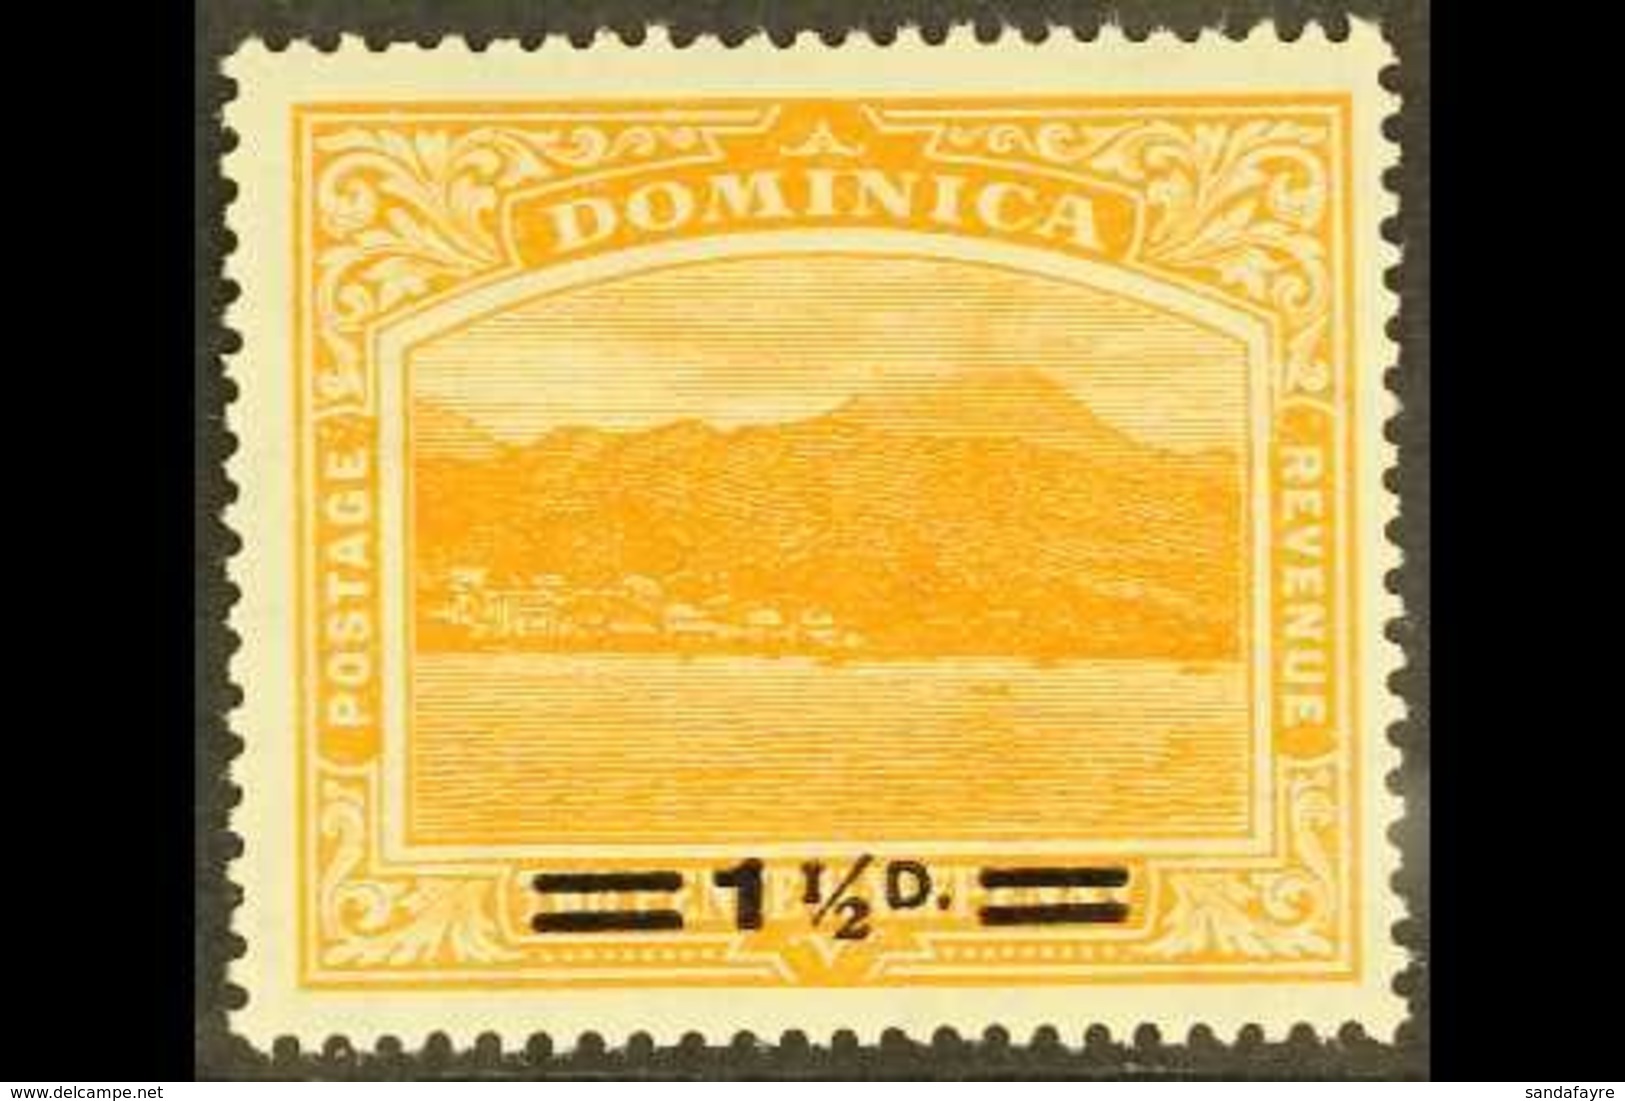 1920 1½d On 2½d Orange Surcharge With SHORT FRACTION BAR Variety, SG 60a, Never Hinged Mint, Very Fresh. For More Images - Dominica (...-1978)